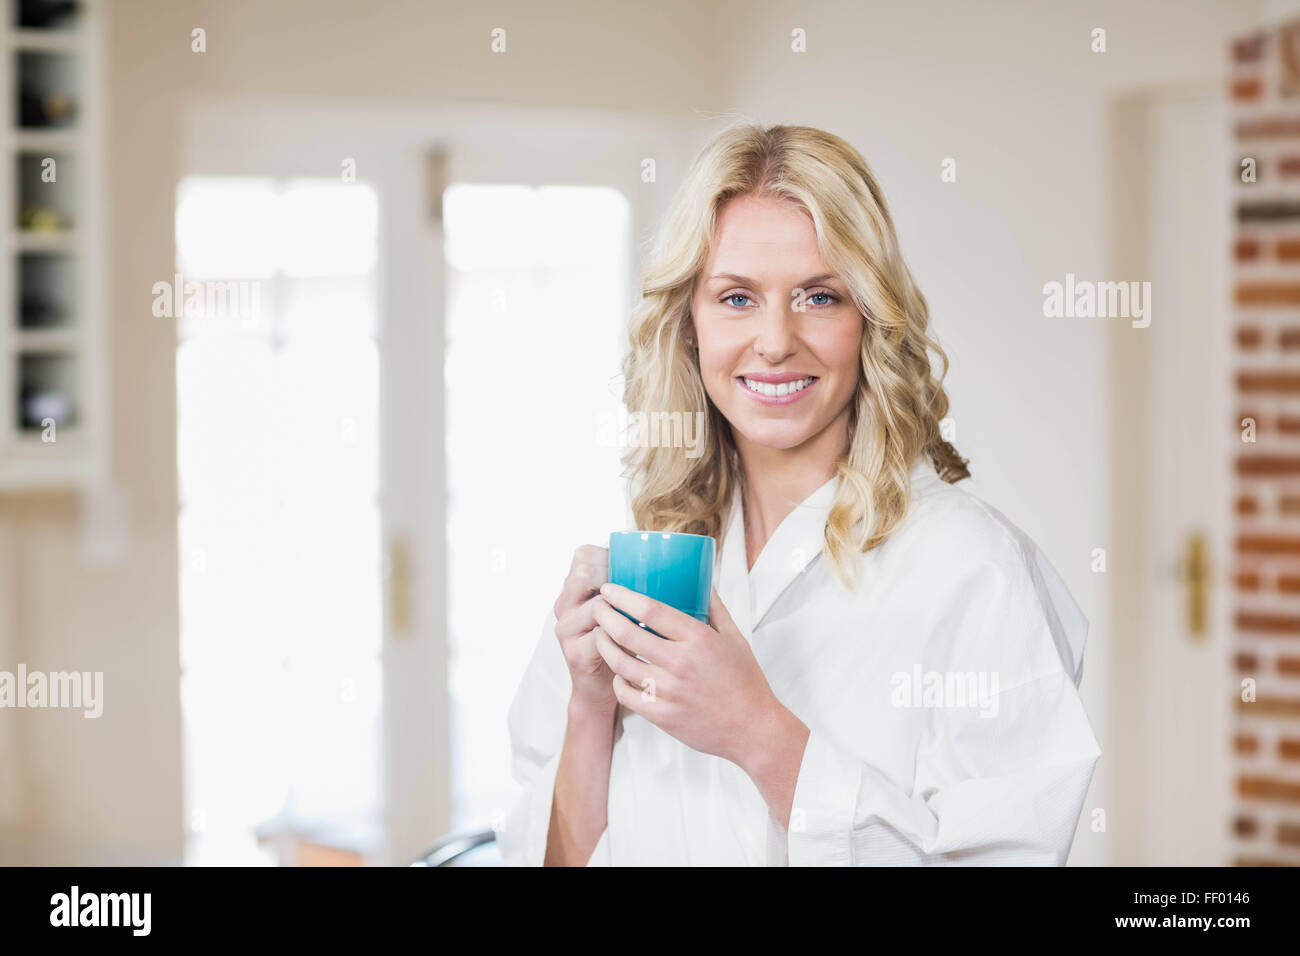 Pretty woman having a cup of coffee Stock Photo